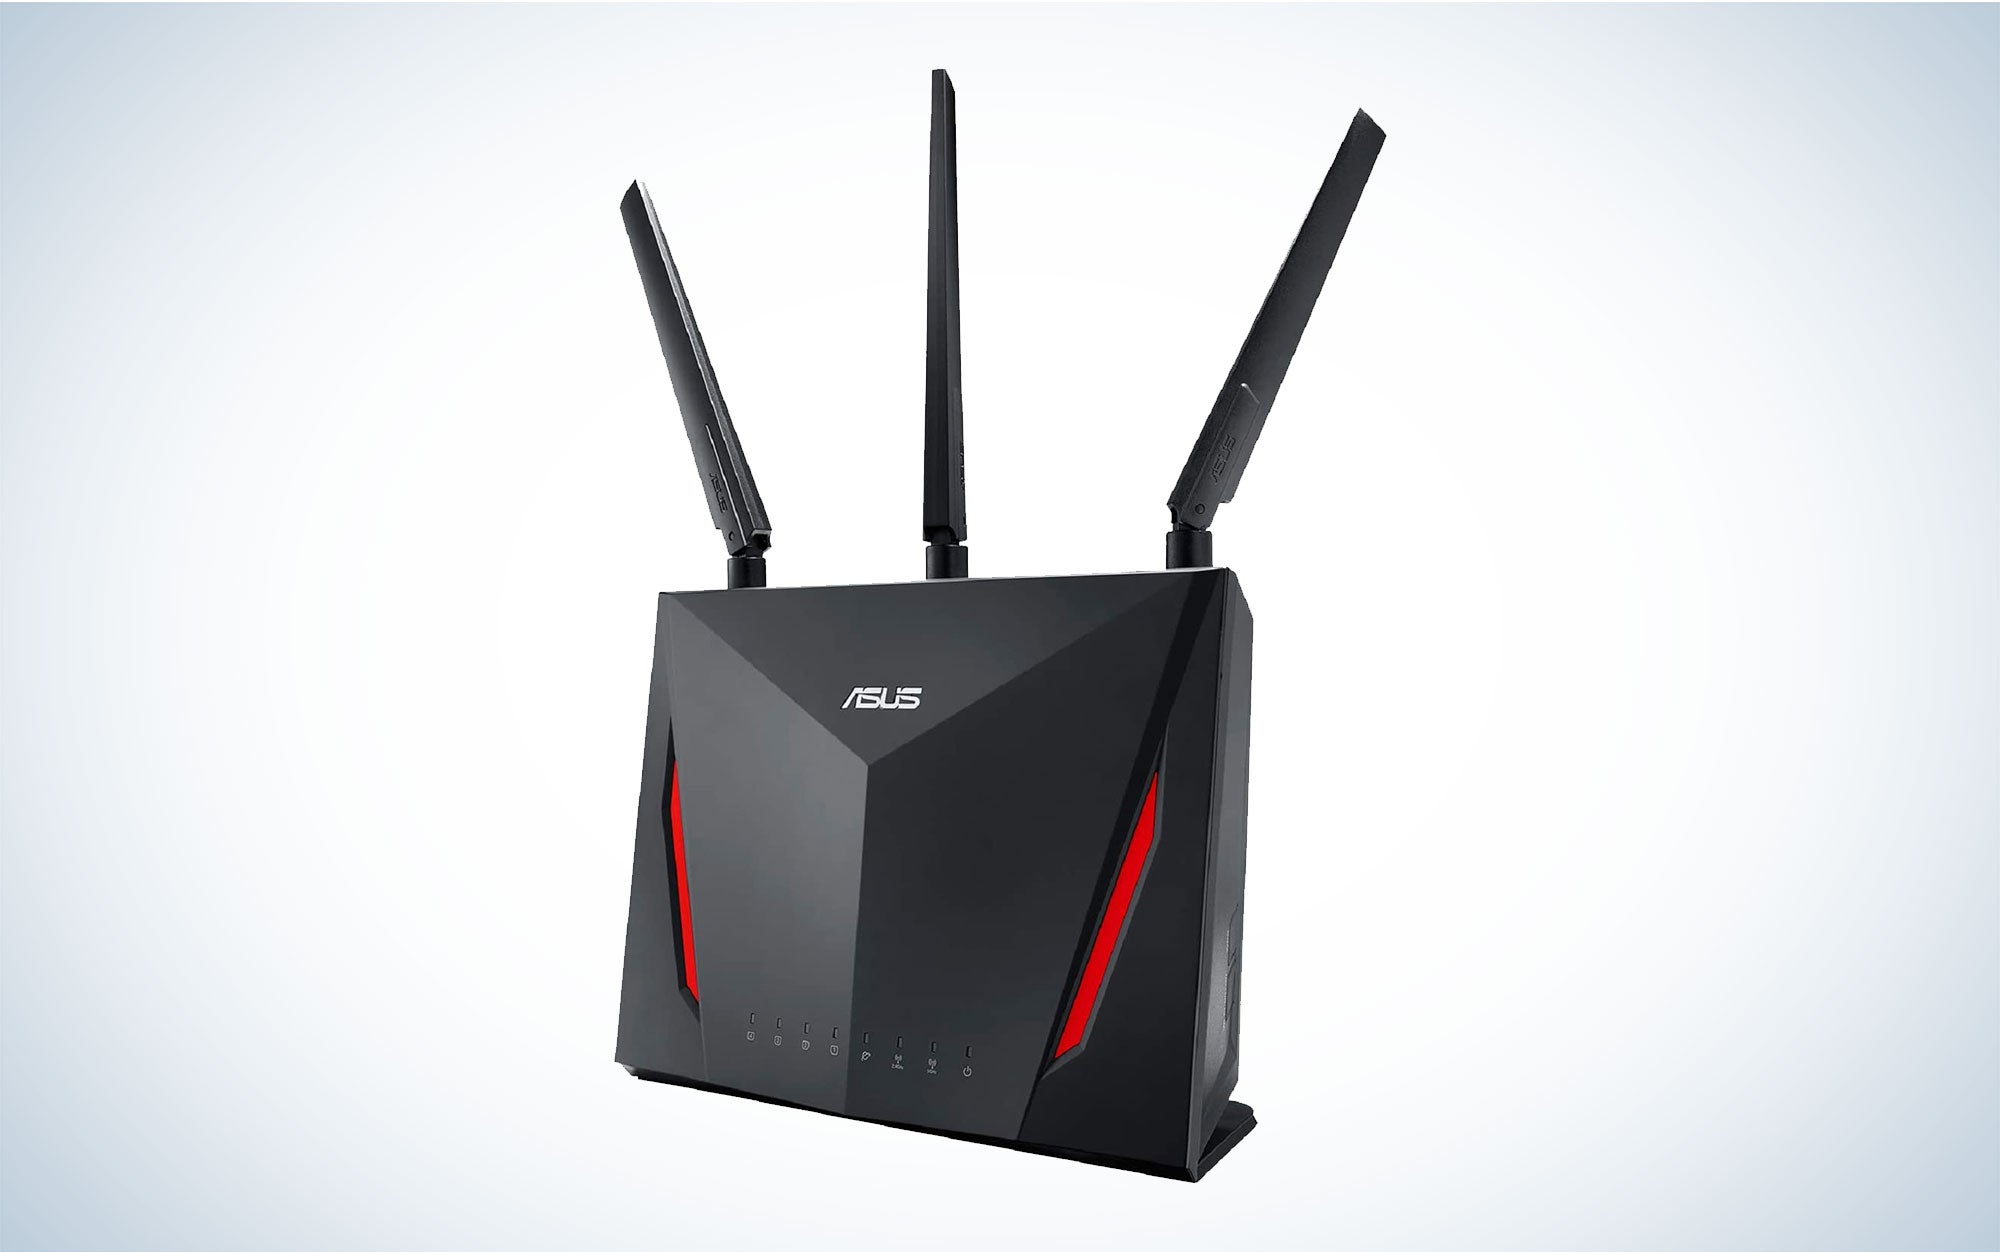 The Asus RT-AC86U is the best gaming router.